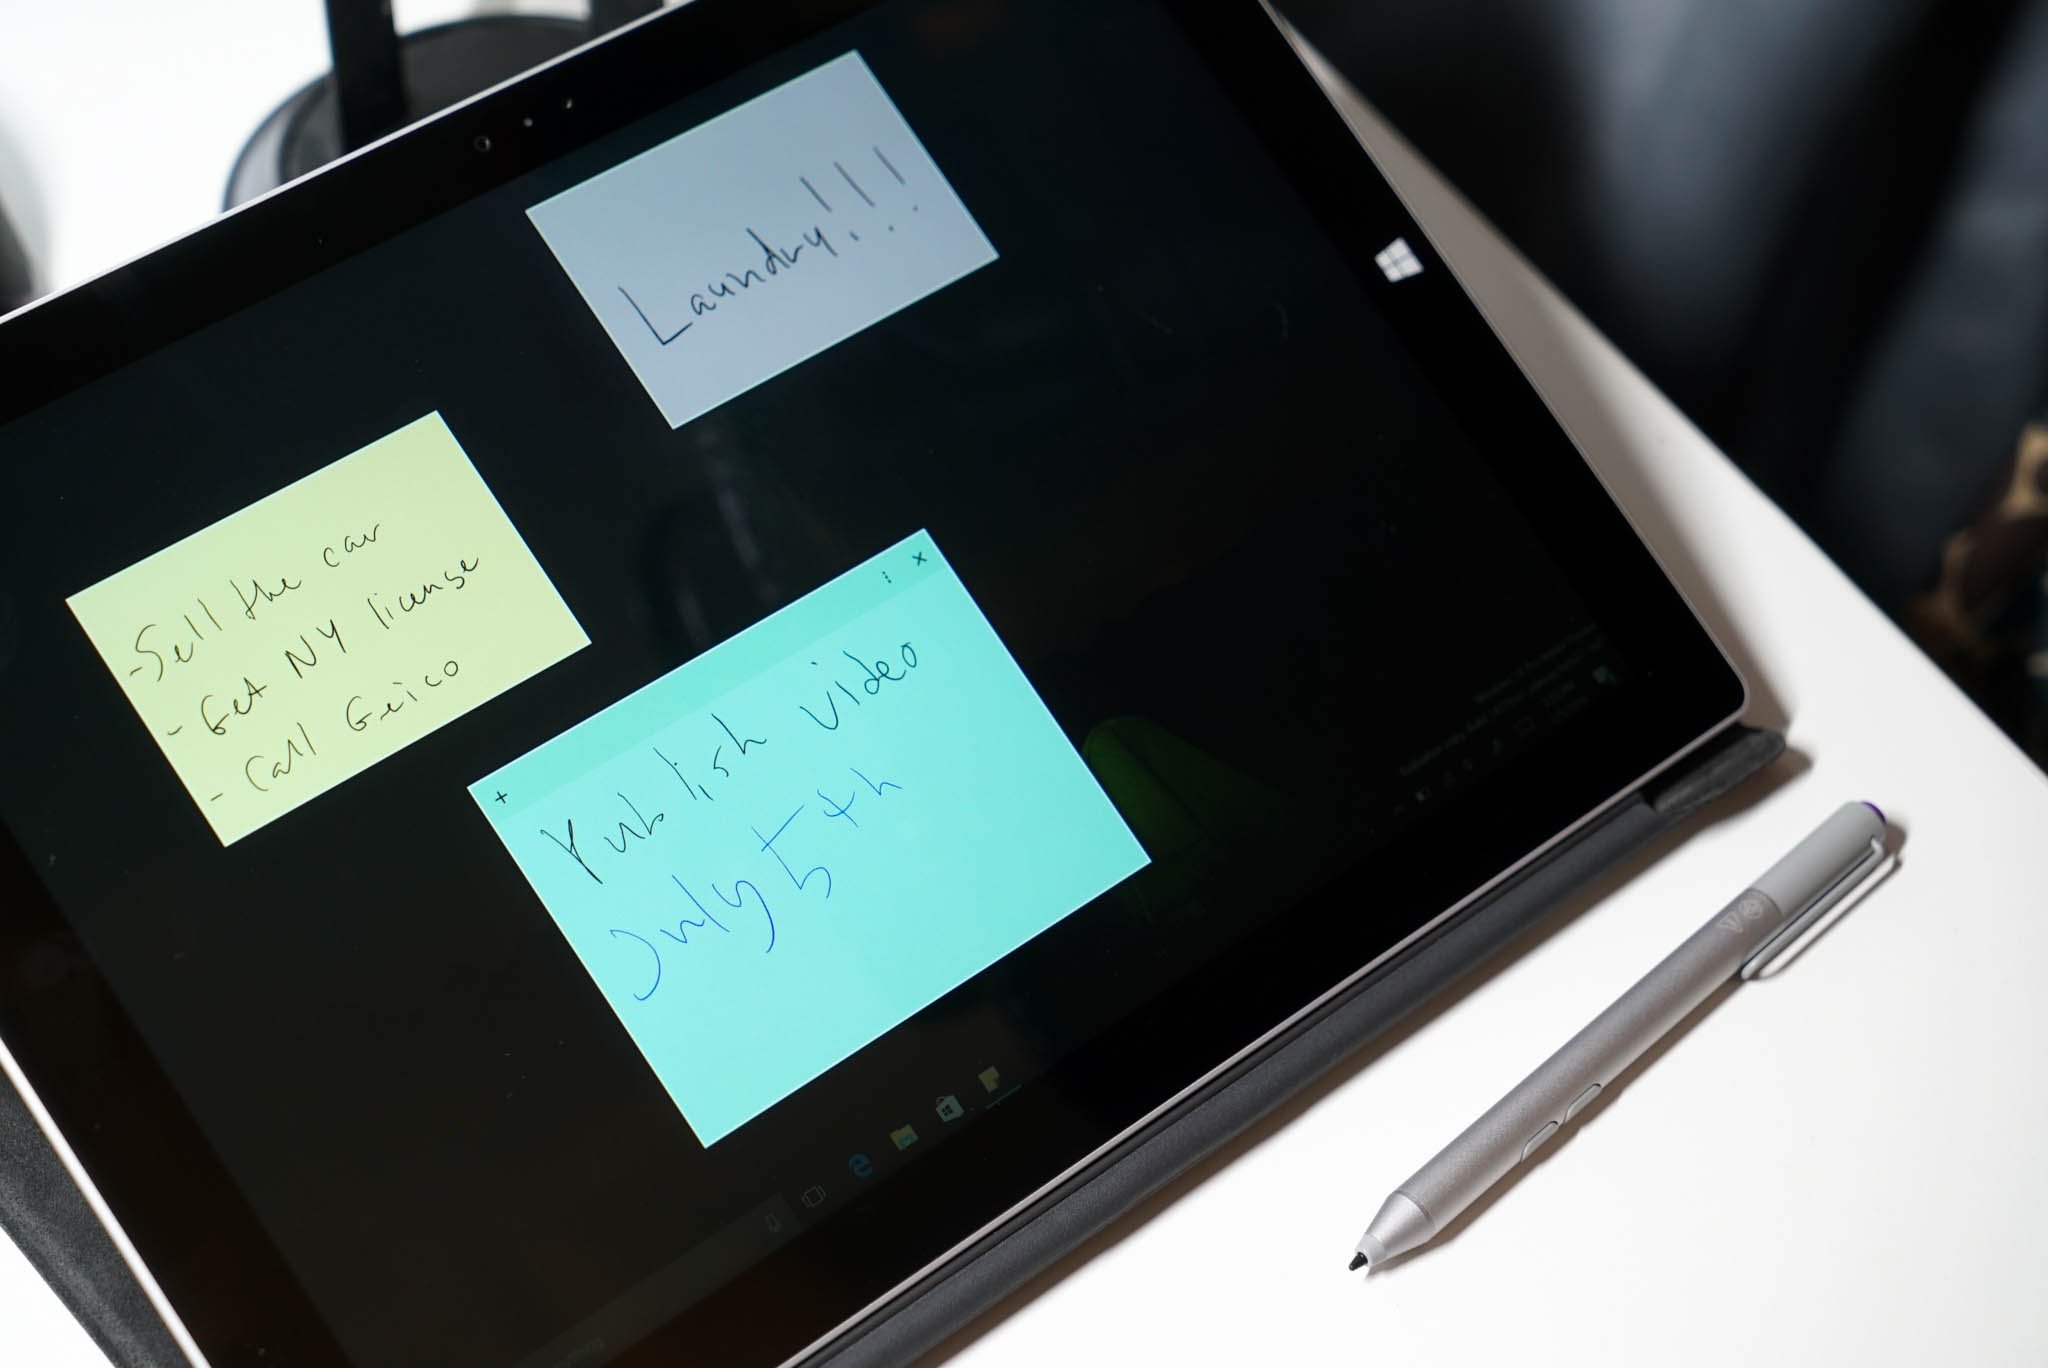 Microsoft Sticky Notes adds support for bullet lists, new maps view, more